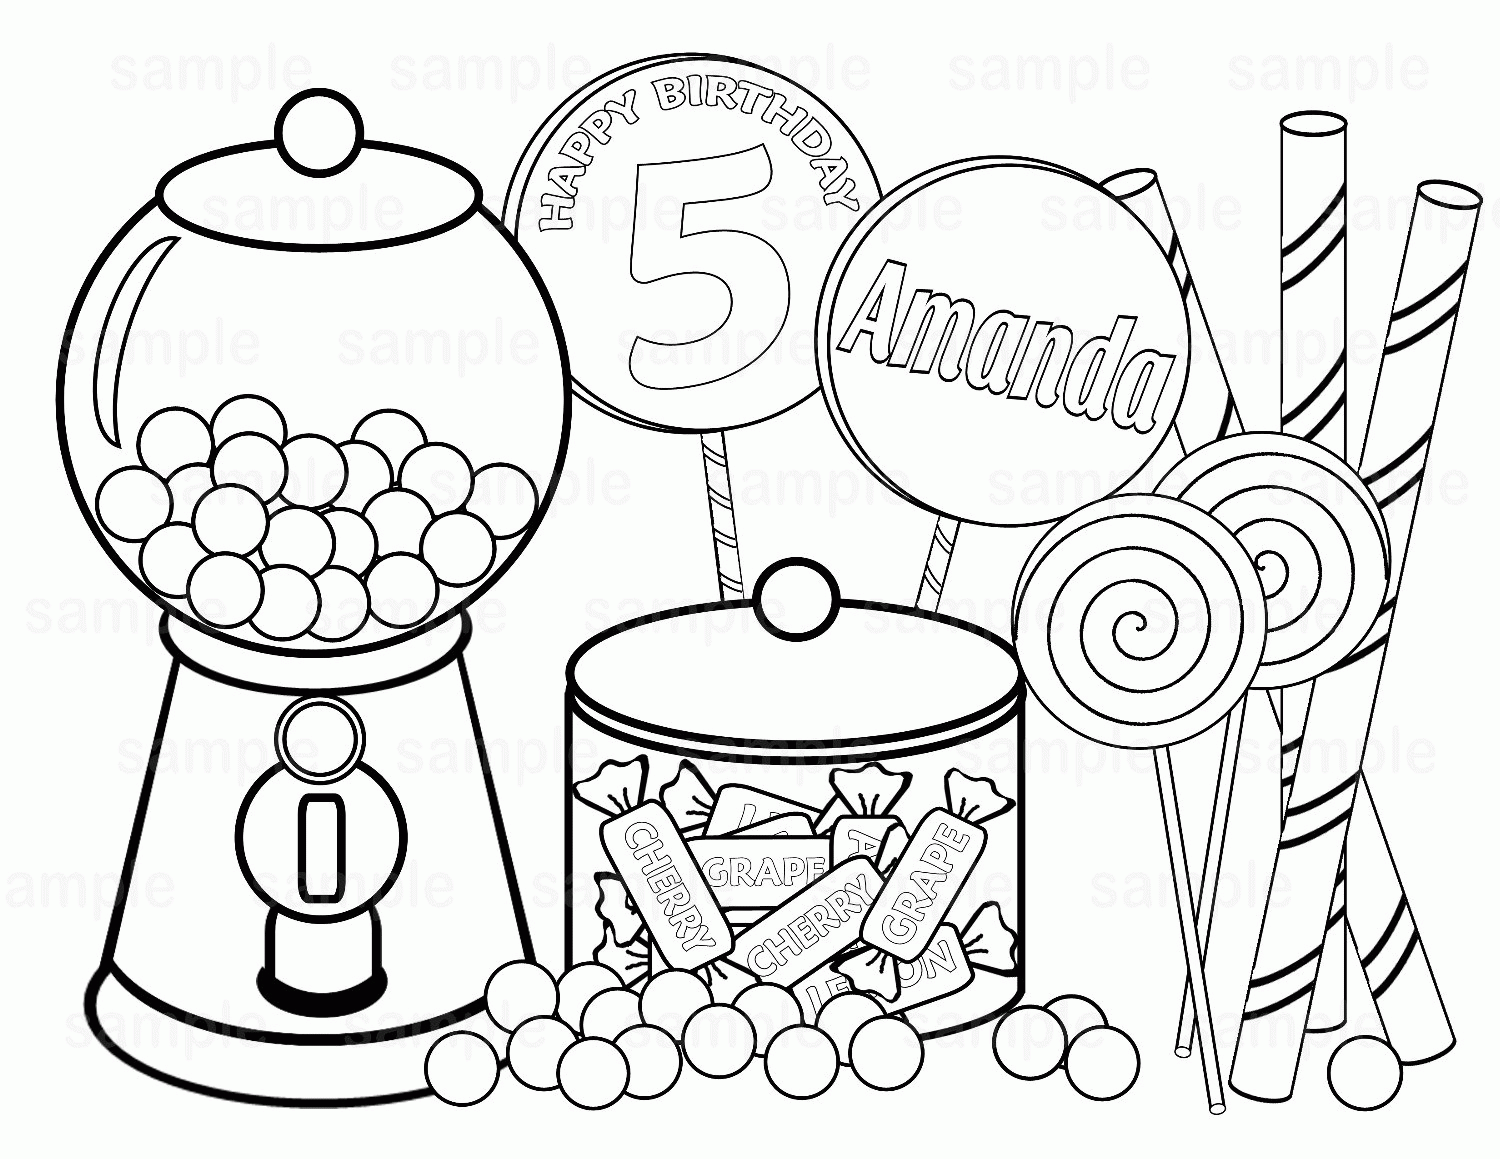 Candy Crush Coloring Pages - Coloring Pages For All Ages